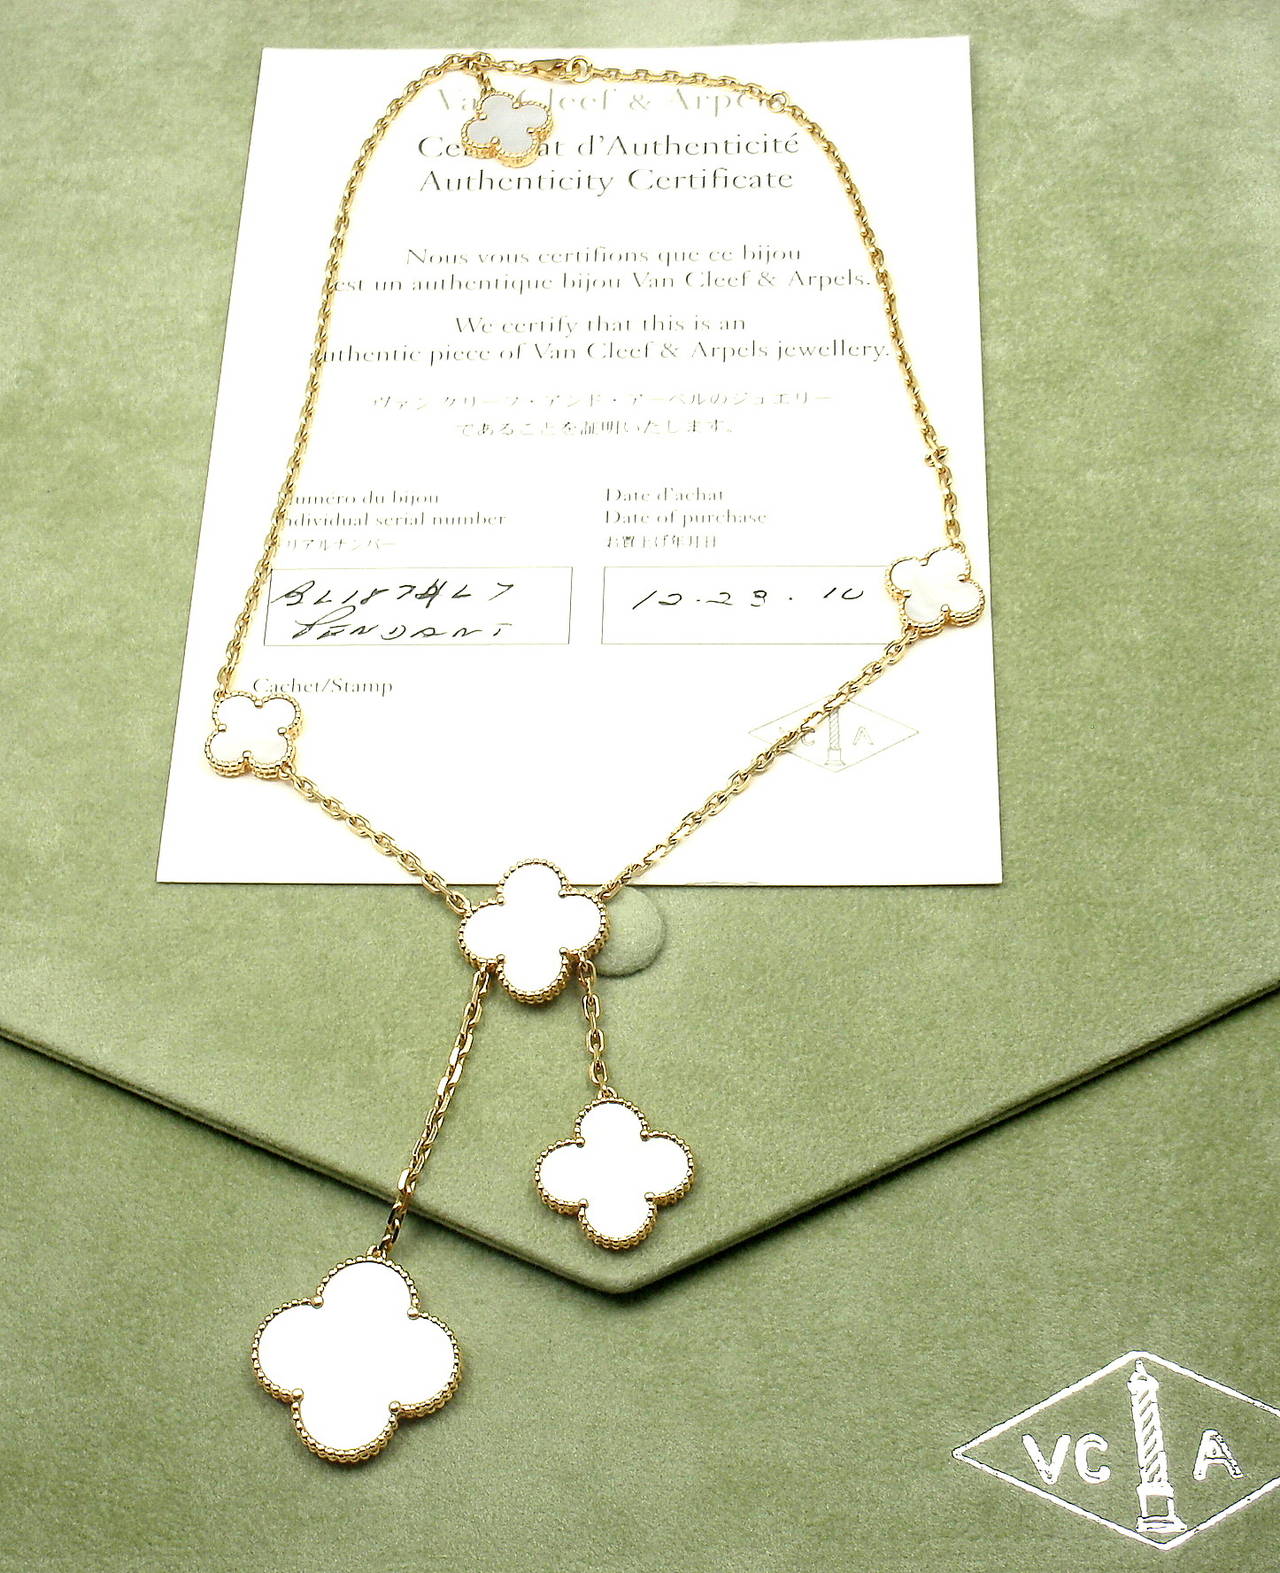 Van Cleef & Arpels Magic Alhambra 18k Yellow Gold 6 Motifs White Mother of Pearl Necklace.
With 6 motifs of mother of pearl alhambra stones 26mm, 20mm and 15mm.
This necklace comes with VCA box & VCA certificate.

Metal: 18k Yellow Gold
Length: